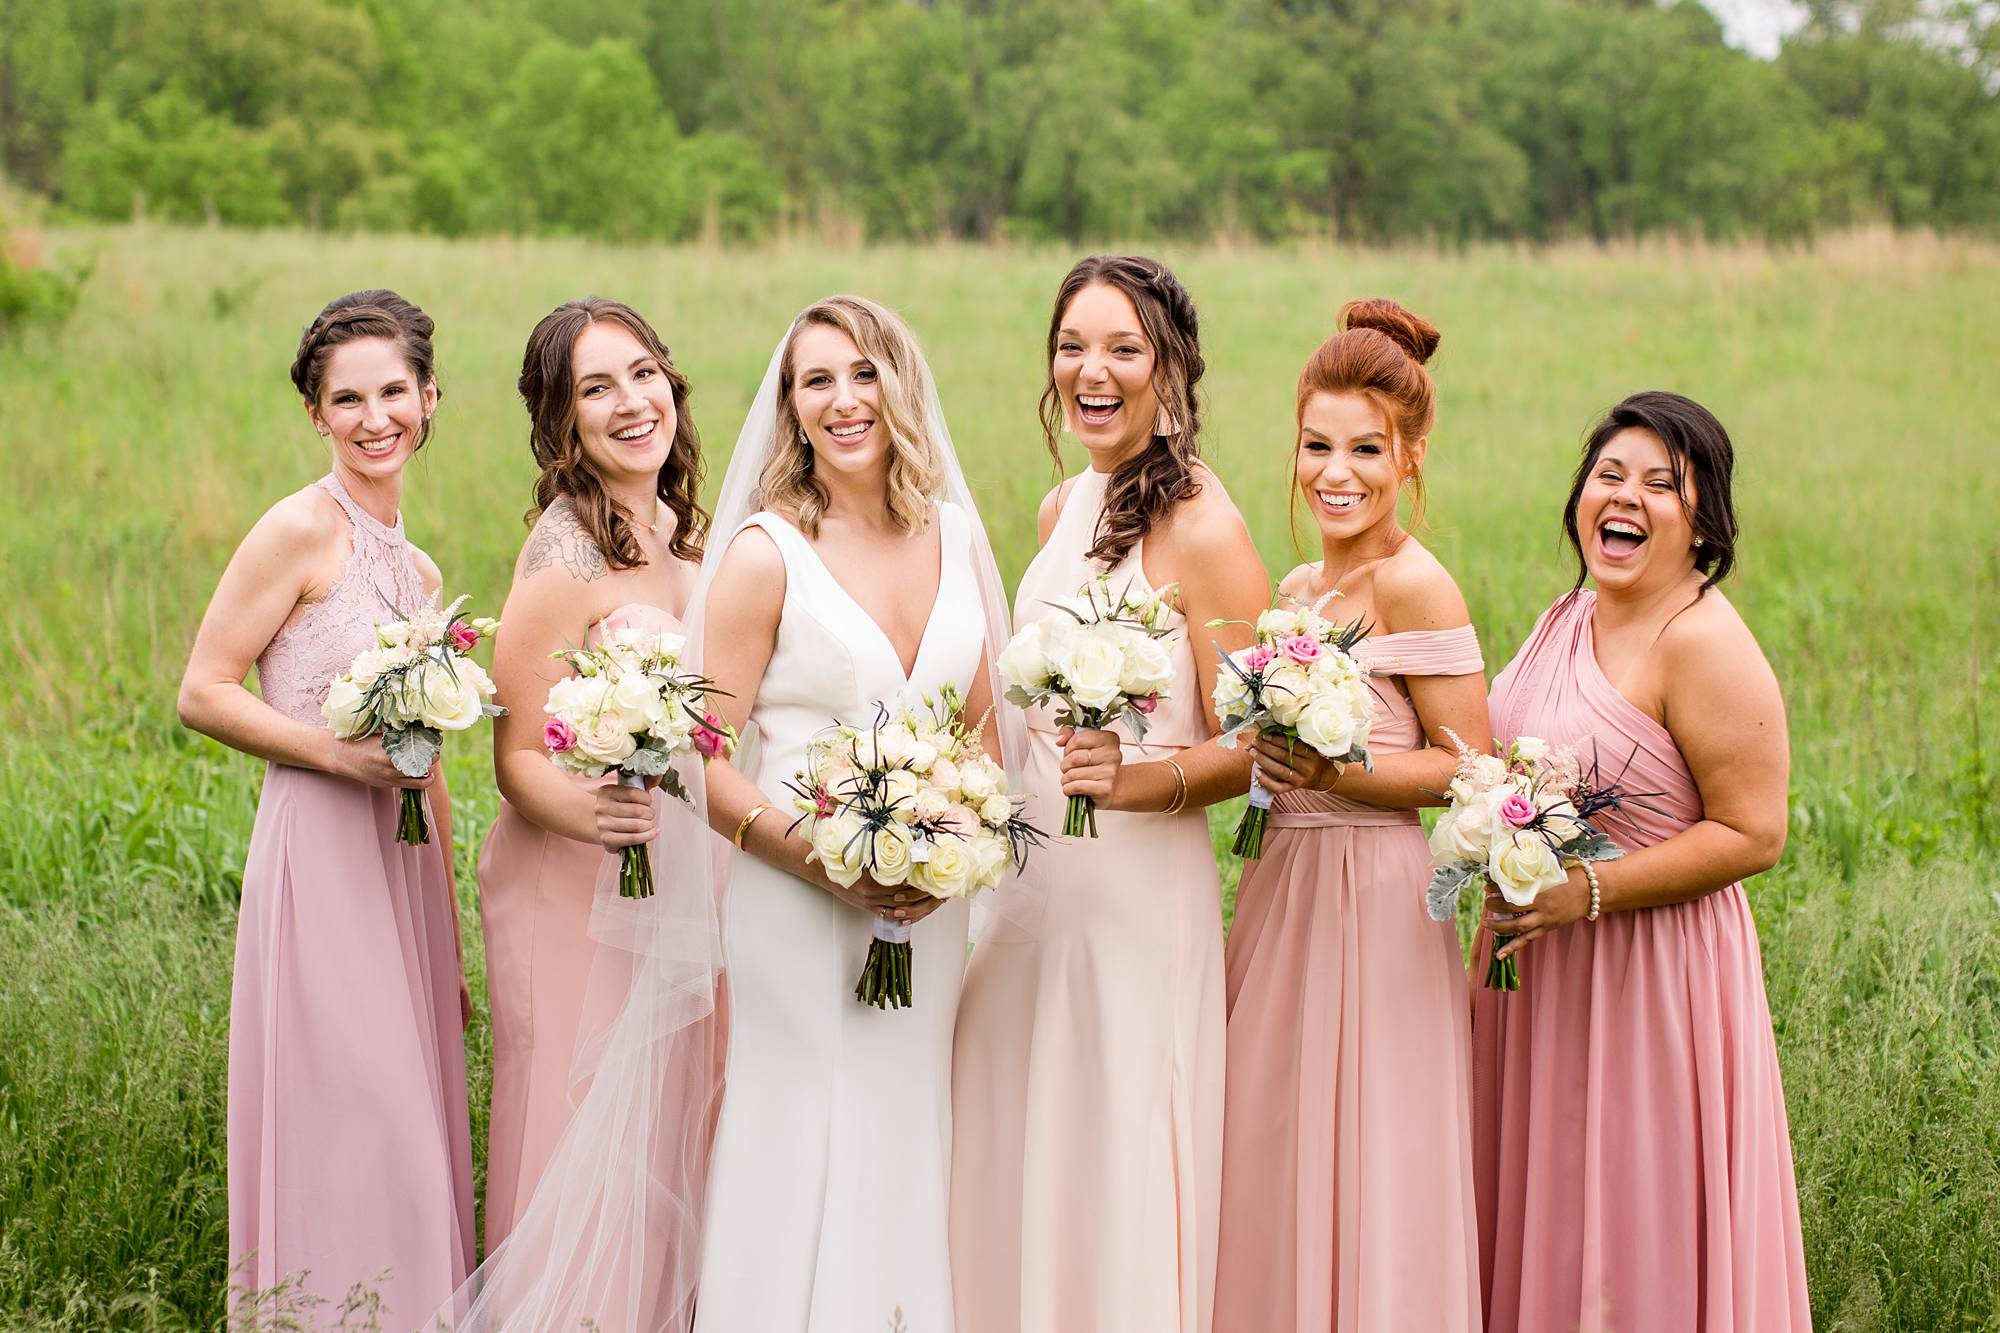 Fenner Nature Center wedding photographs with bridal party